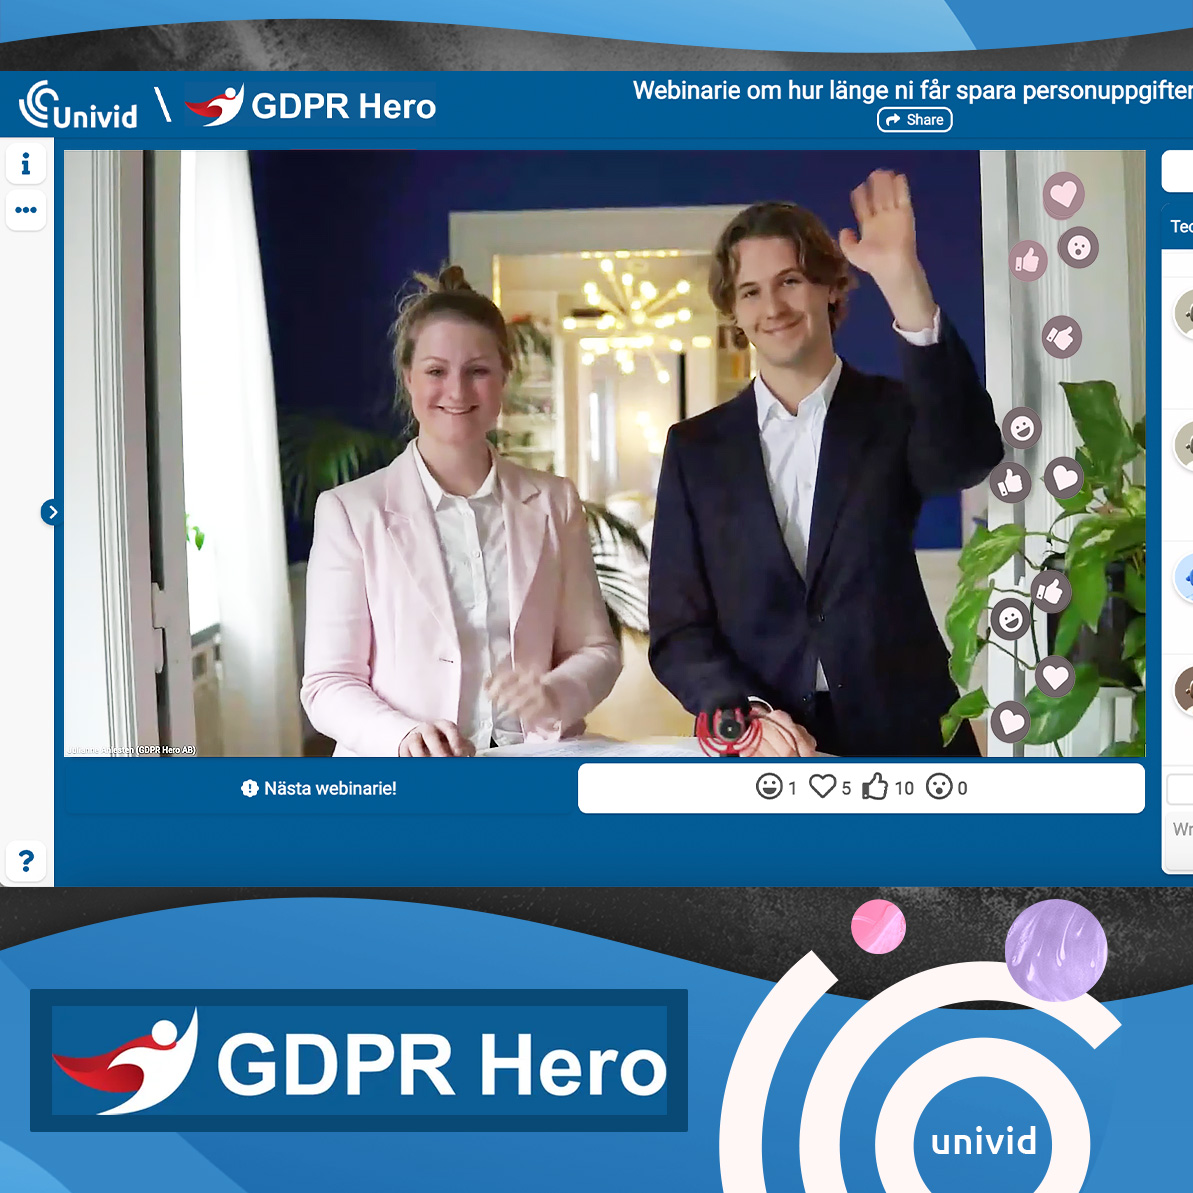 Presented in style, from something that looked like an official representation directly from the White House, GDPR Hero showed how their SaaS tool can make your life easier in relation to compliance with #GDPR.